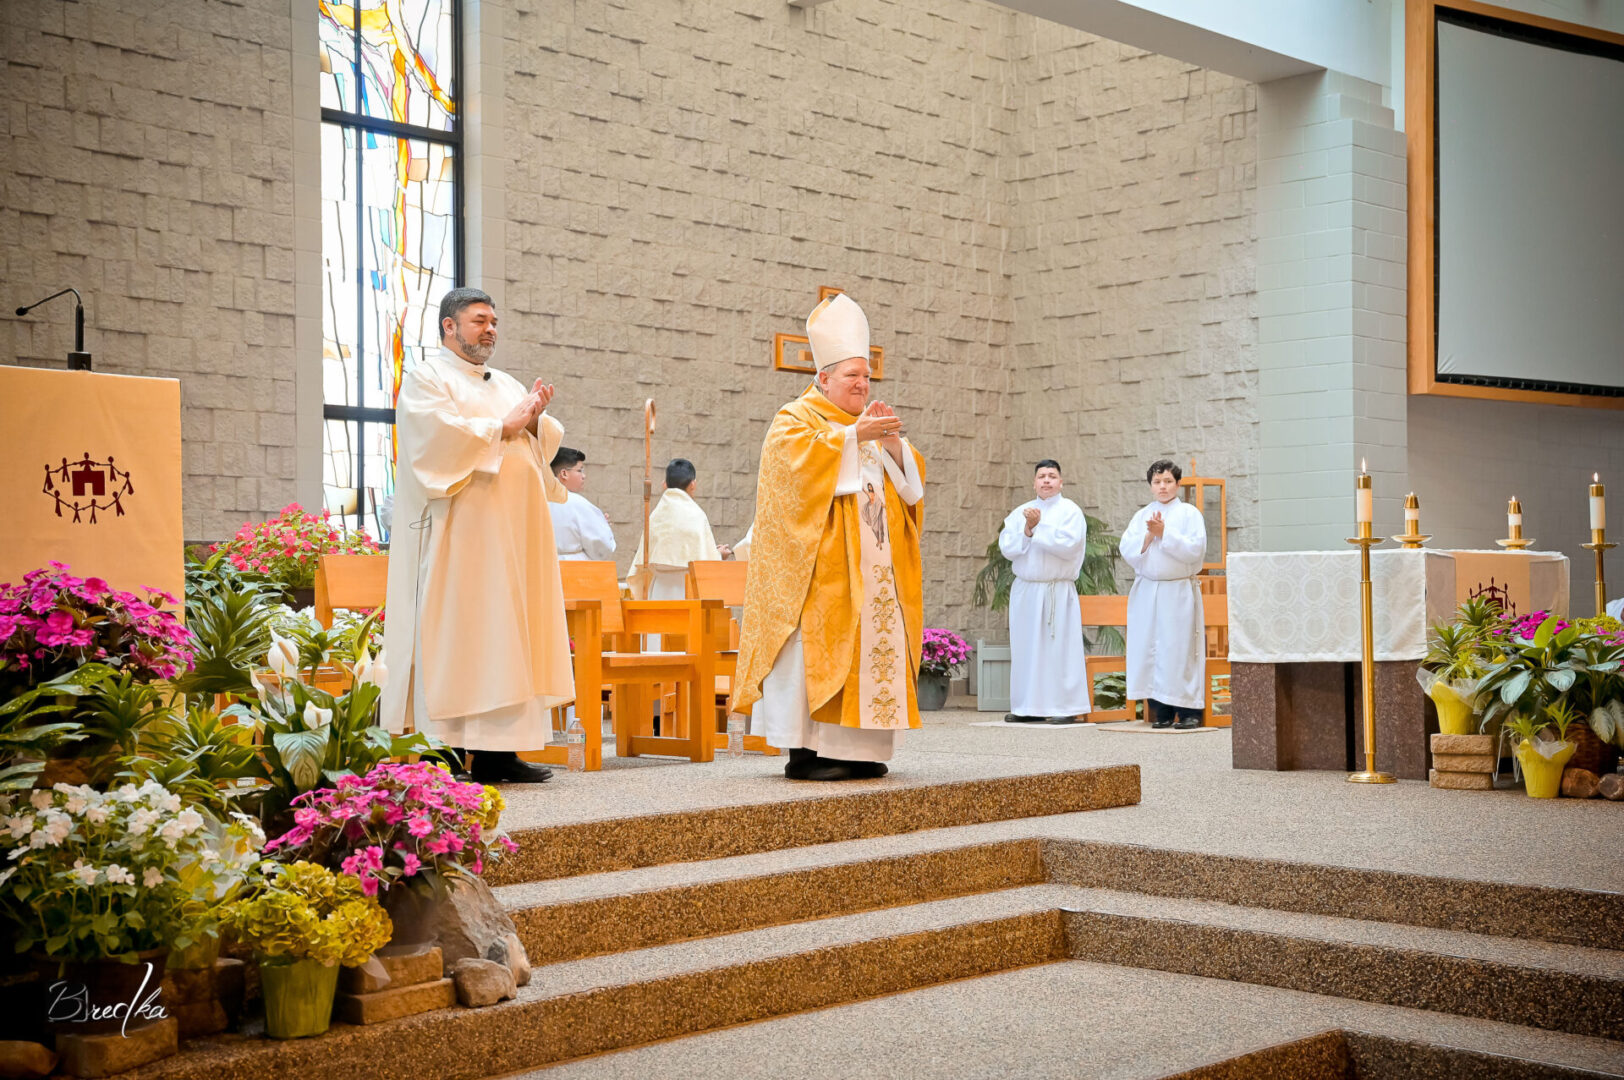 A priest and altar servers in a church.